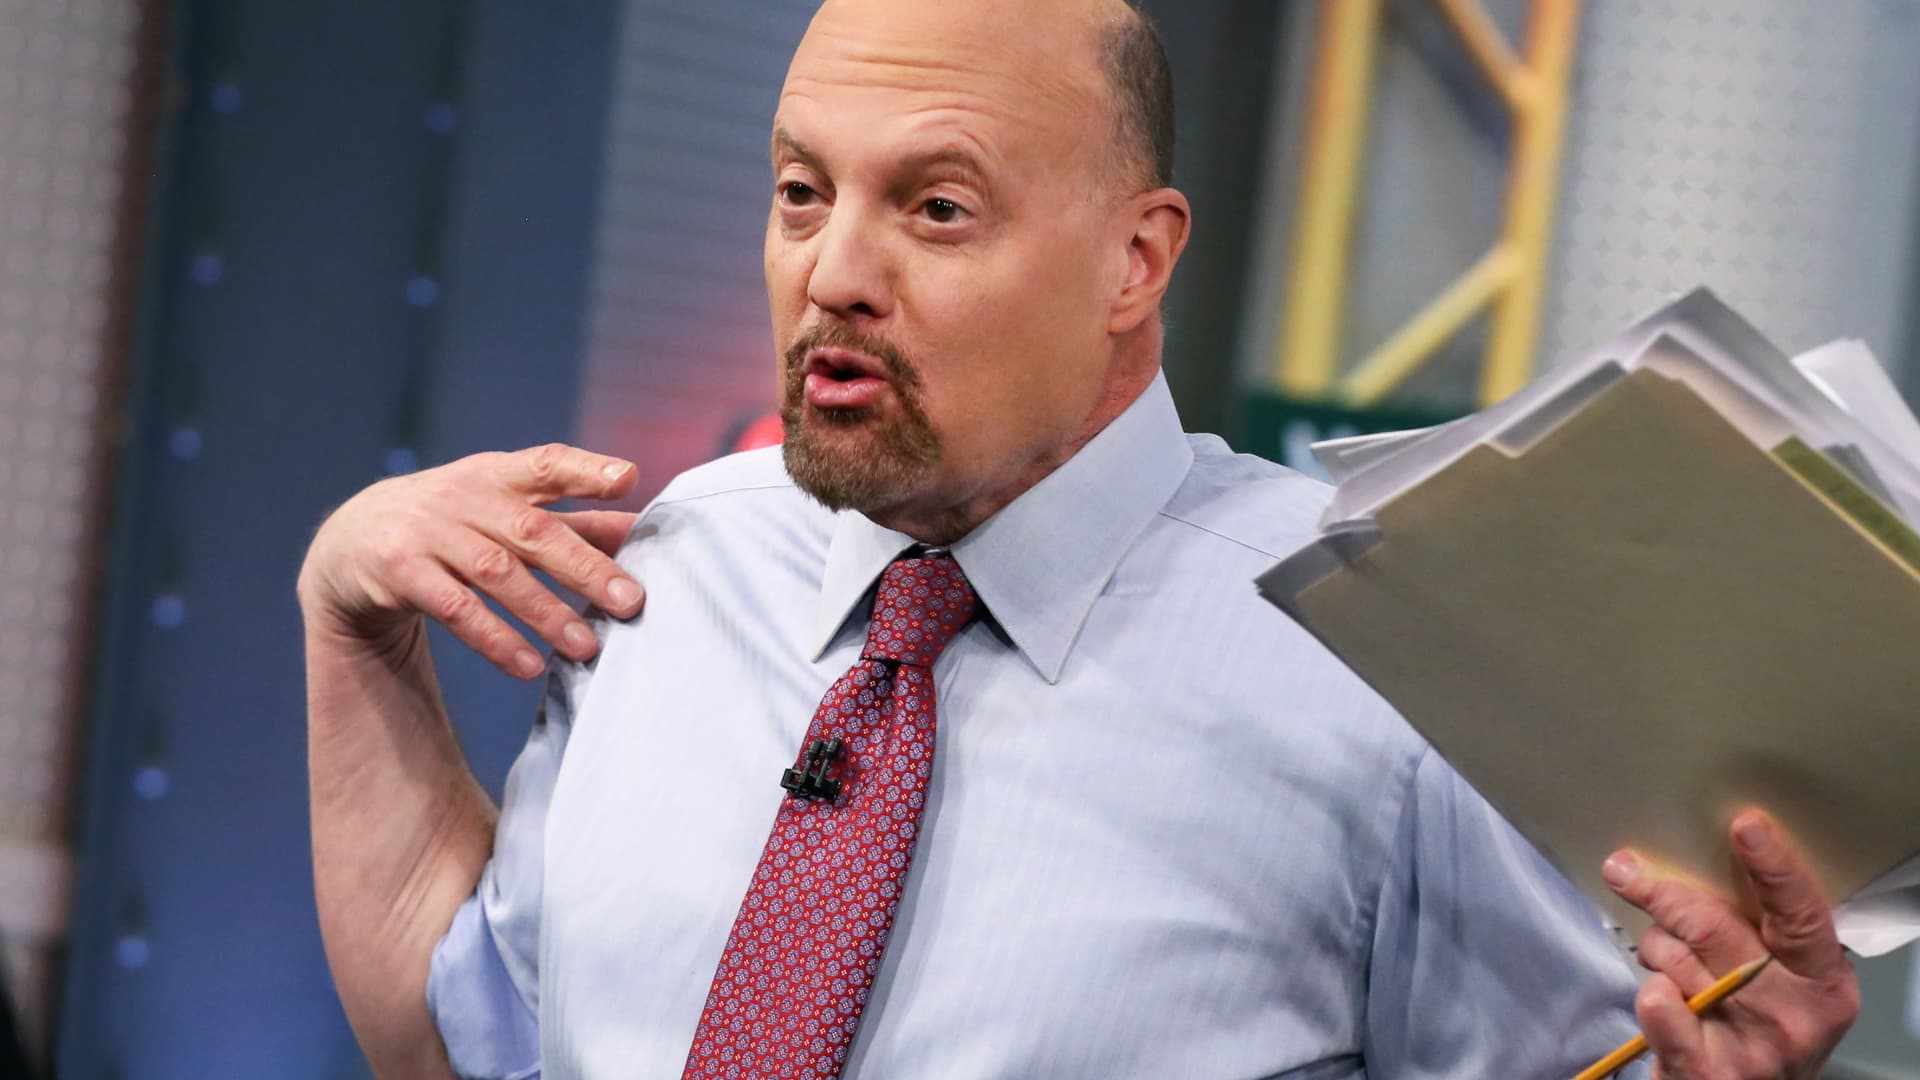 Charts counsel now could be the proper time to purchase gold, Jim Cramer says